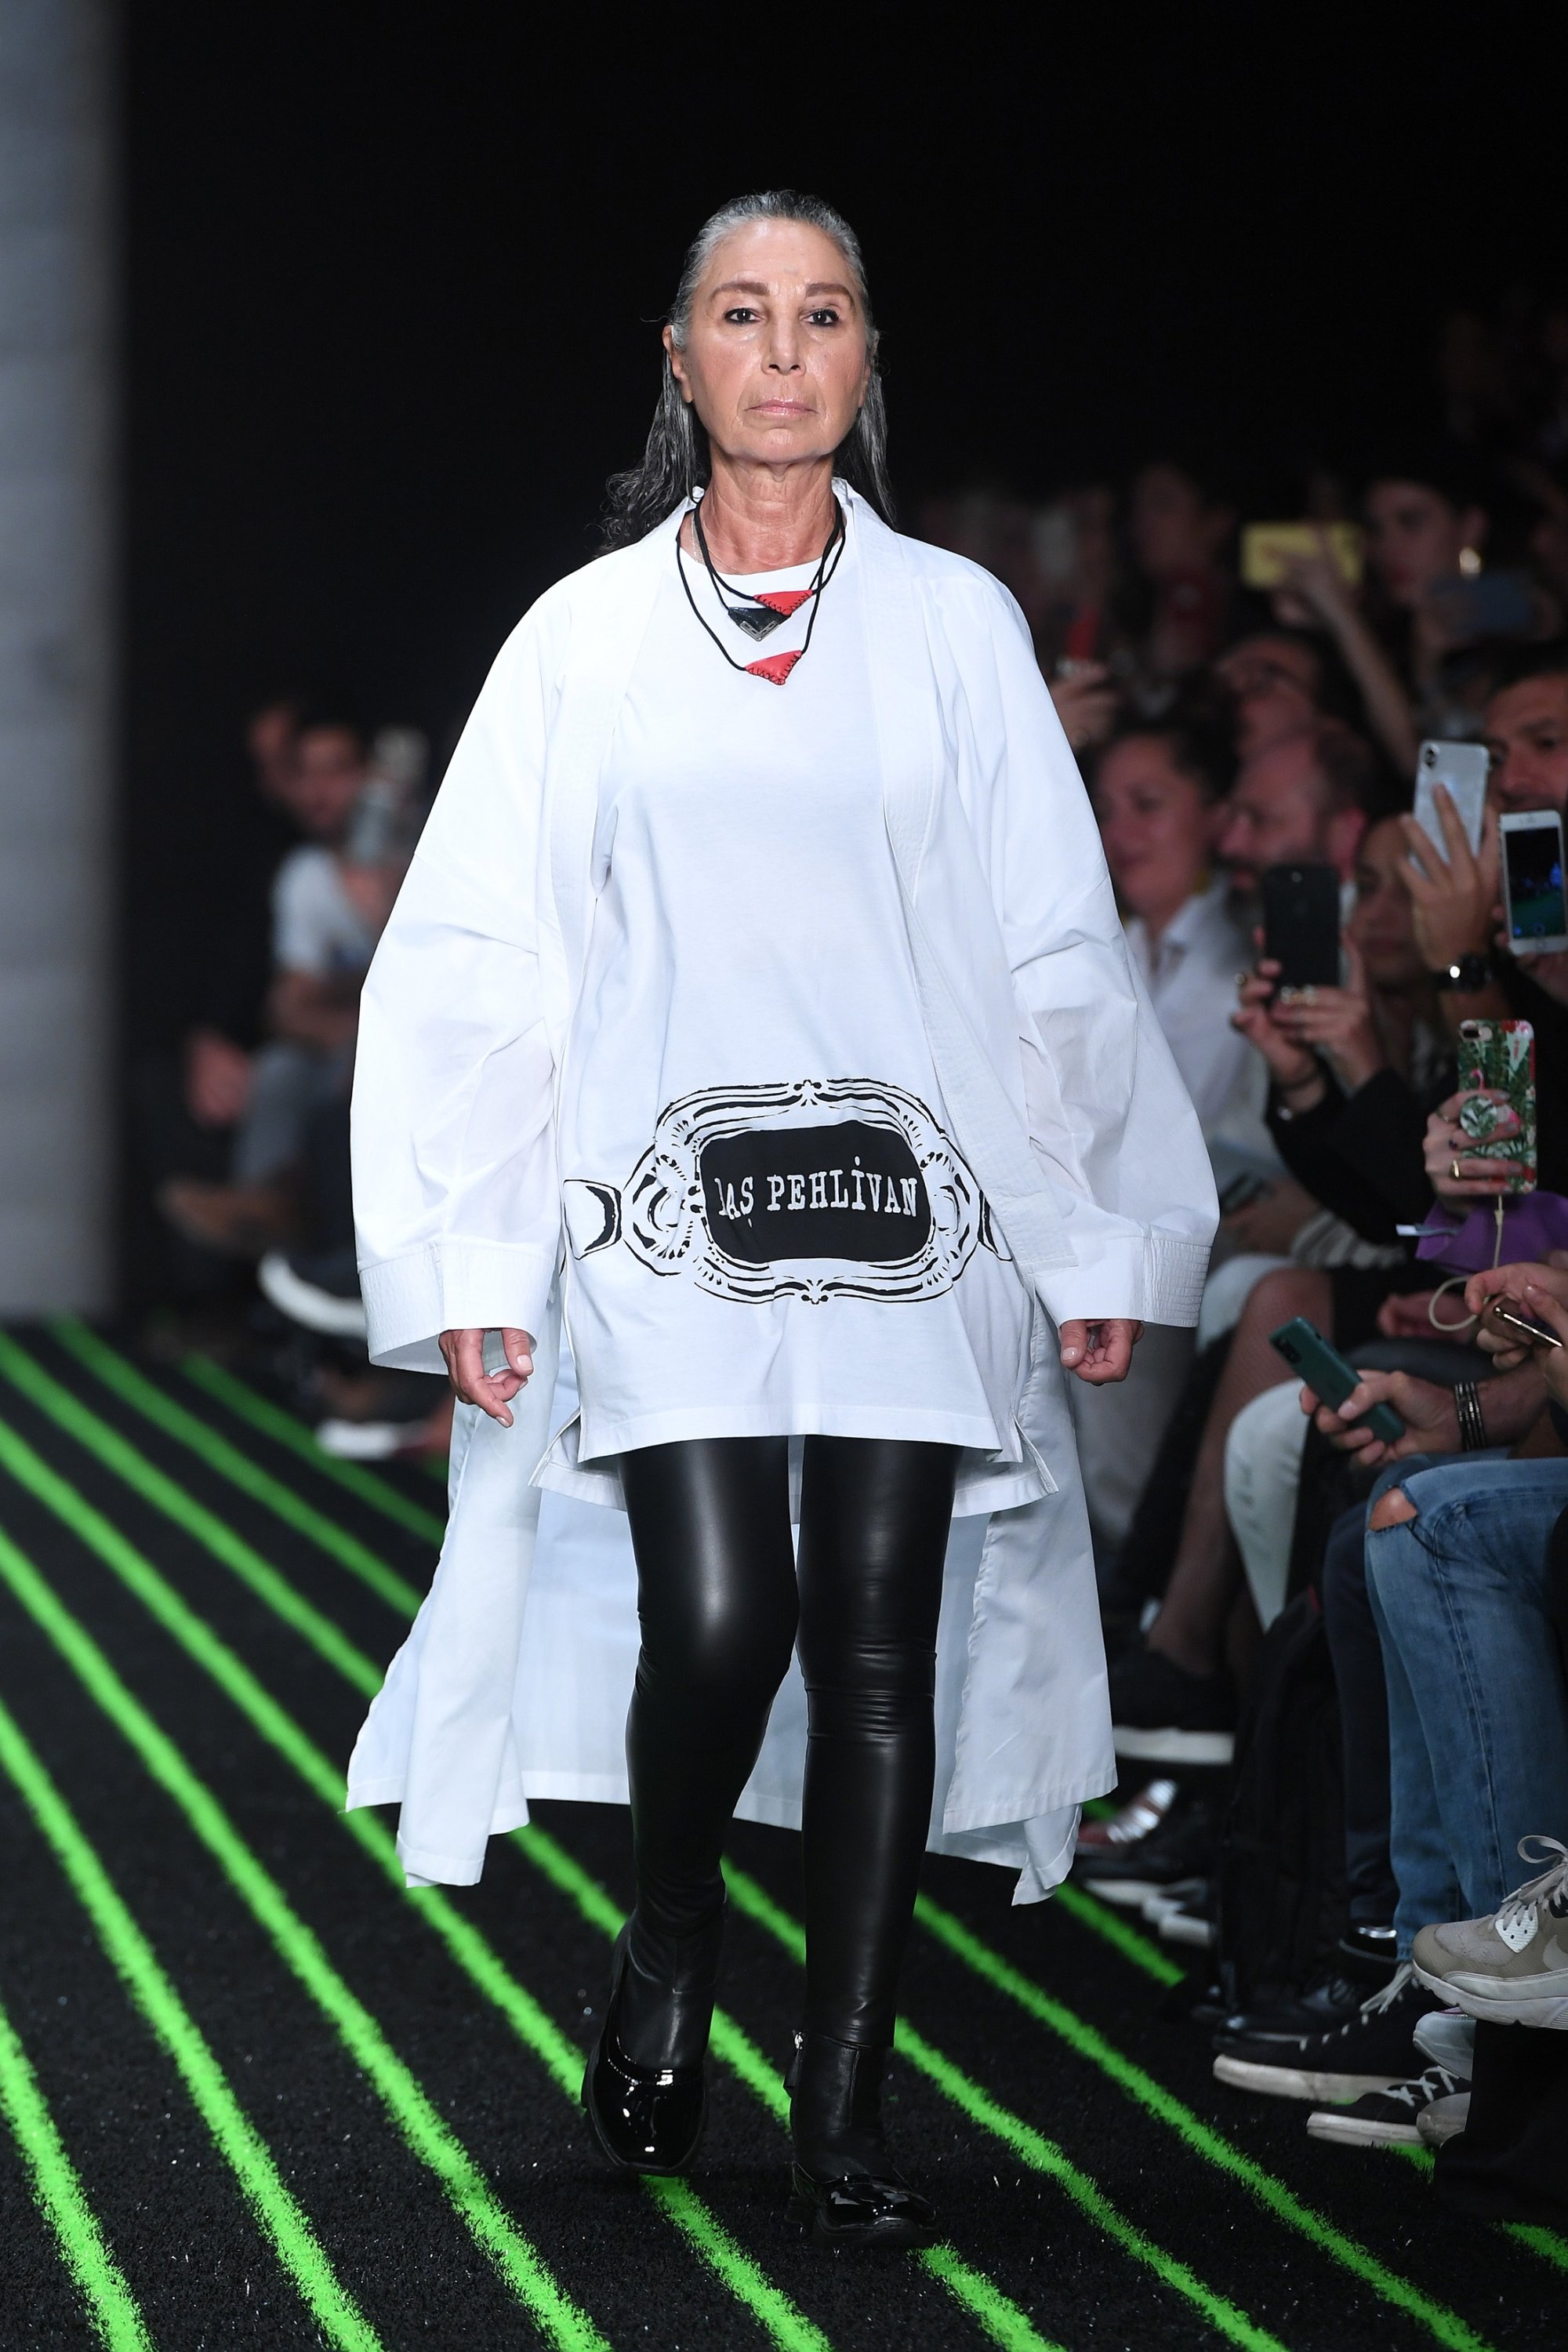 A model walks the runway during the Y Plus By Yakup Biçer show during Mercedes-Benz Istanbul Fashion Week at Zorlu Performance Hall on October 9, 2019 in Istanbul, Turkey. (Getty Images)